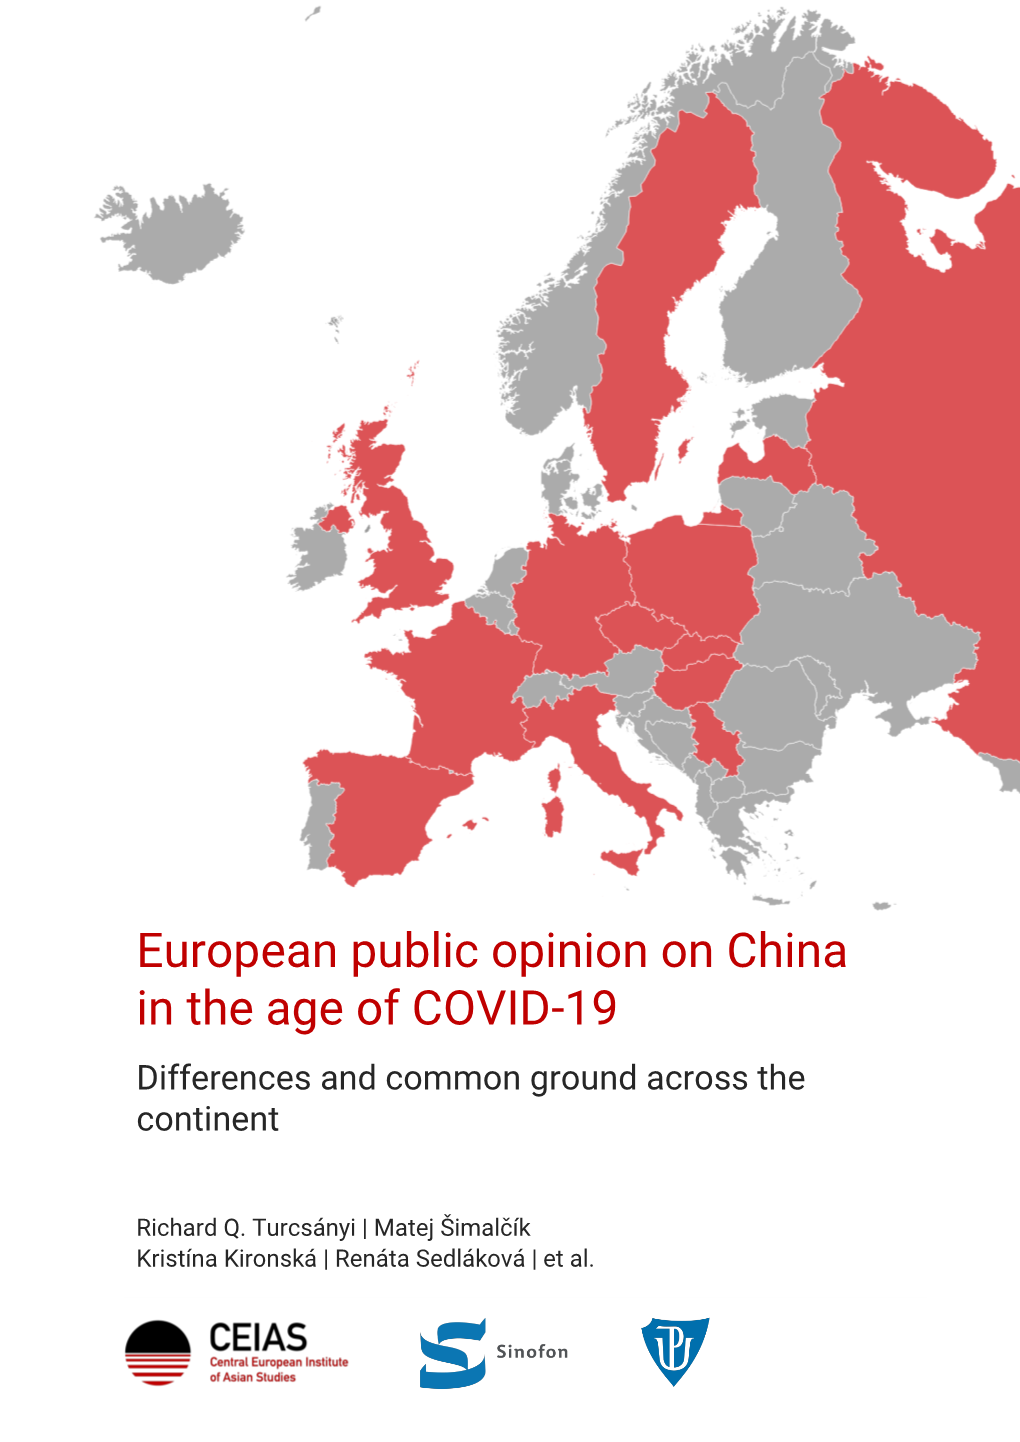 European Public Opinion on China in the Age of COVID-19 Differences and Common Ground Across the Continent